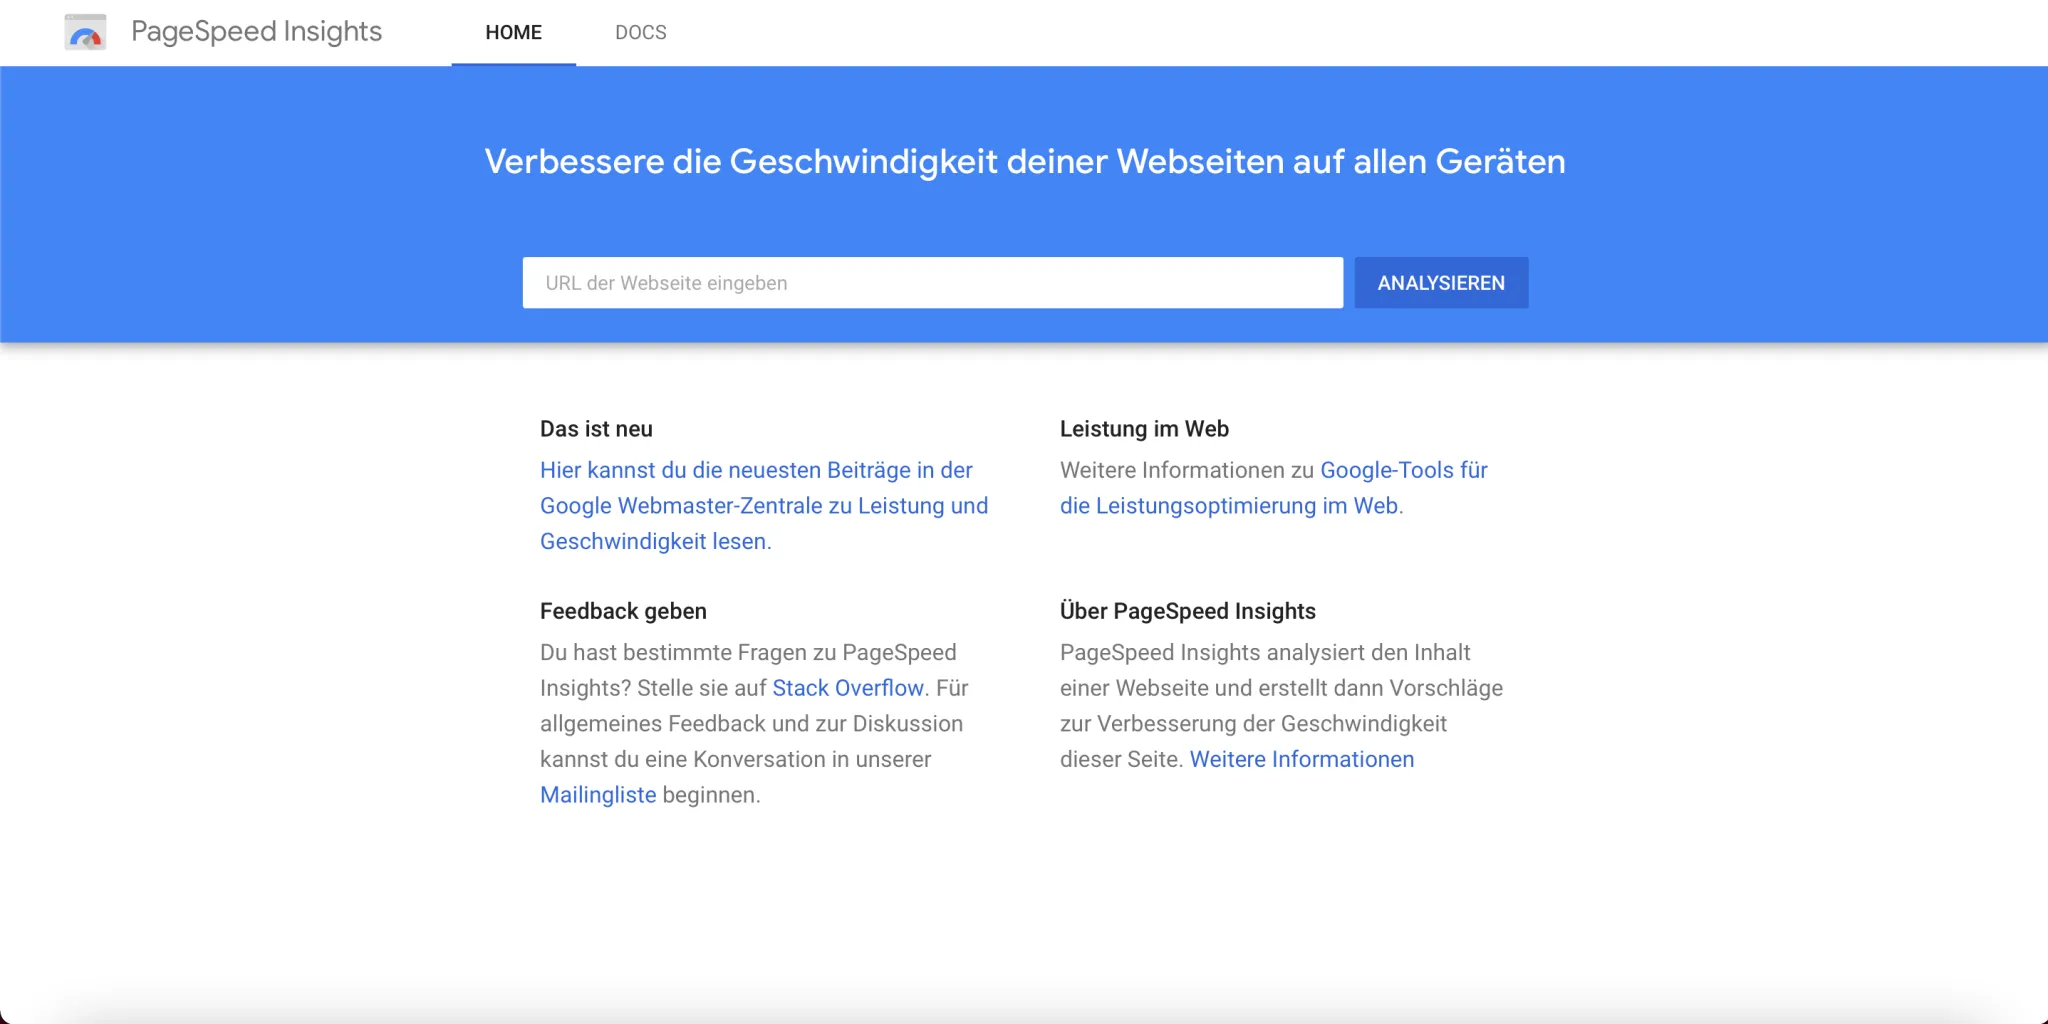 Pagespeed Optimierung